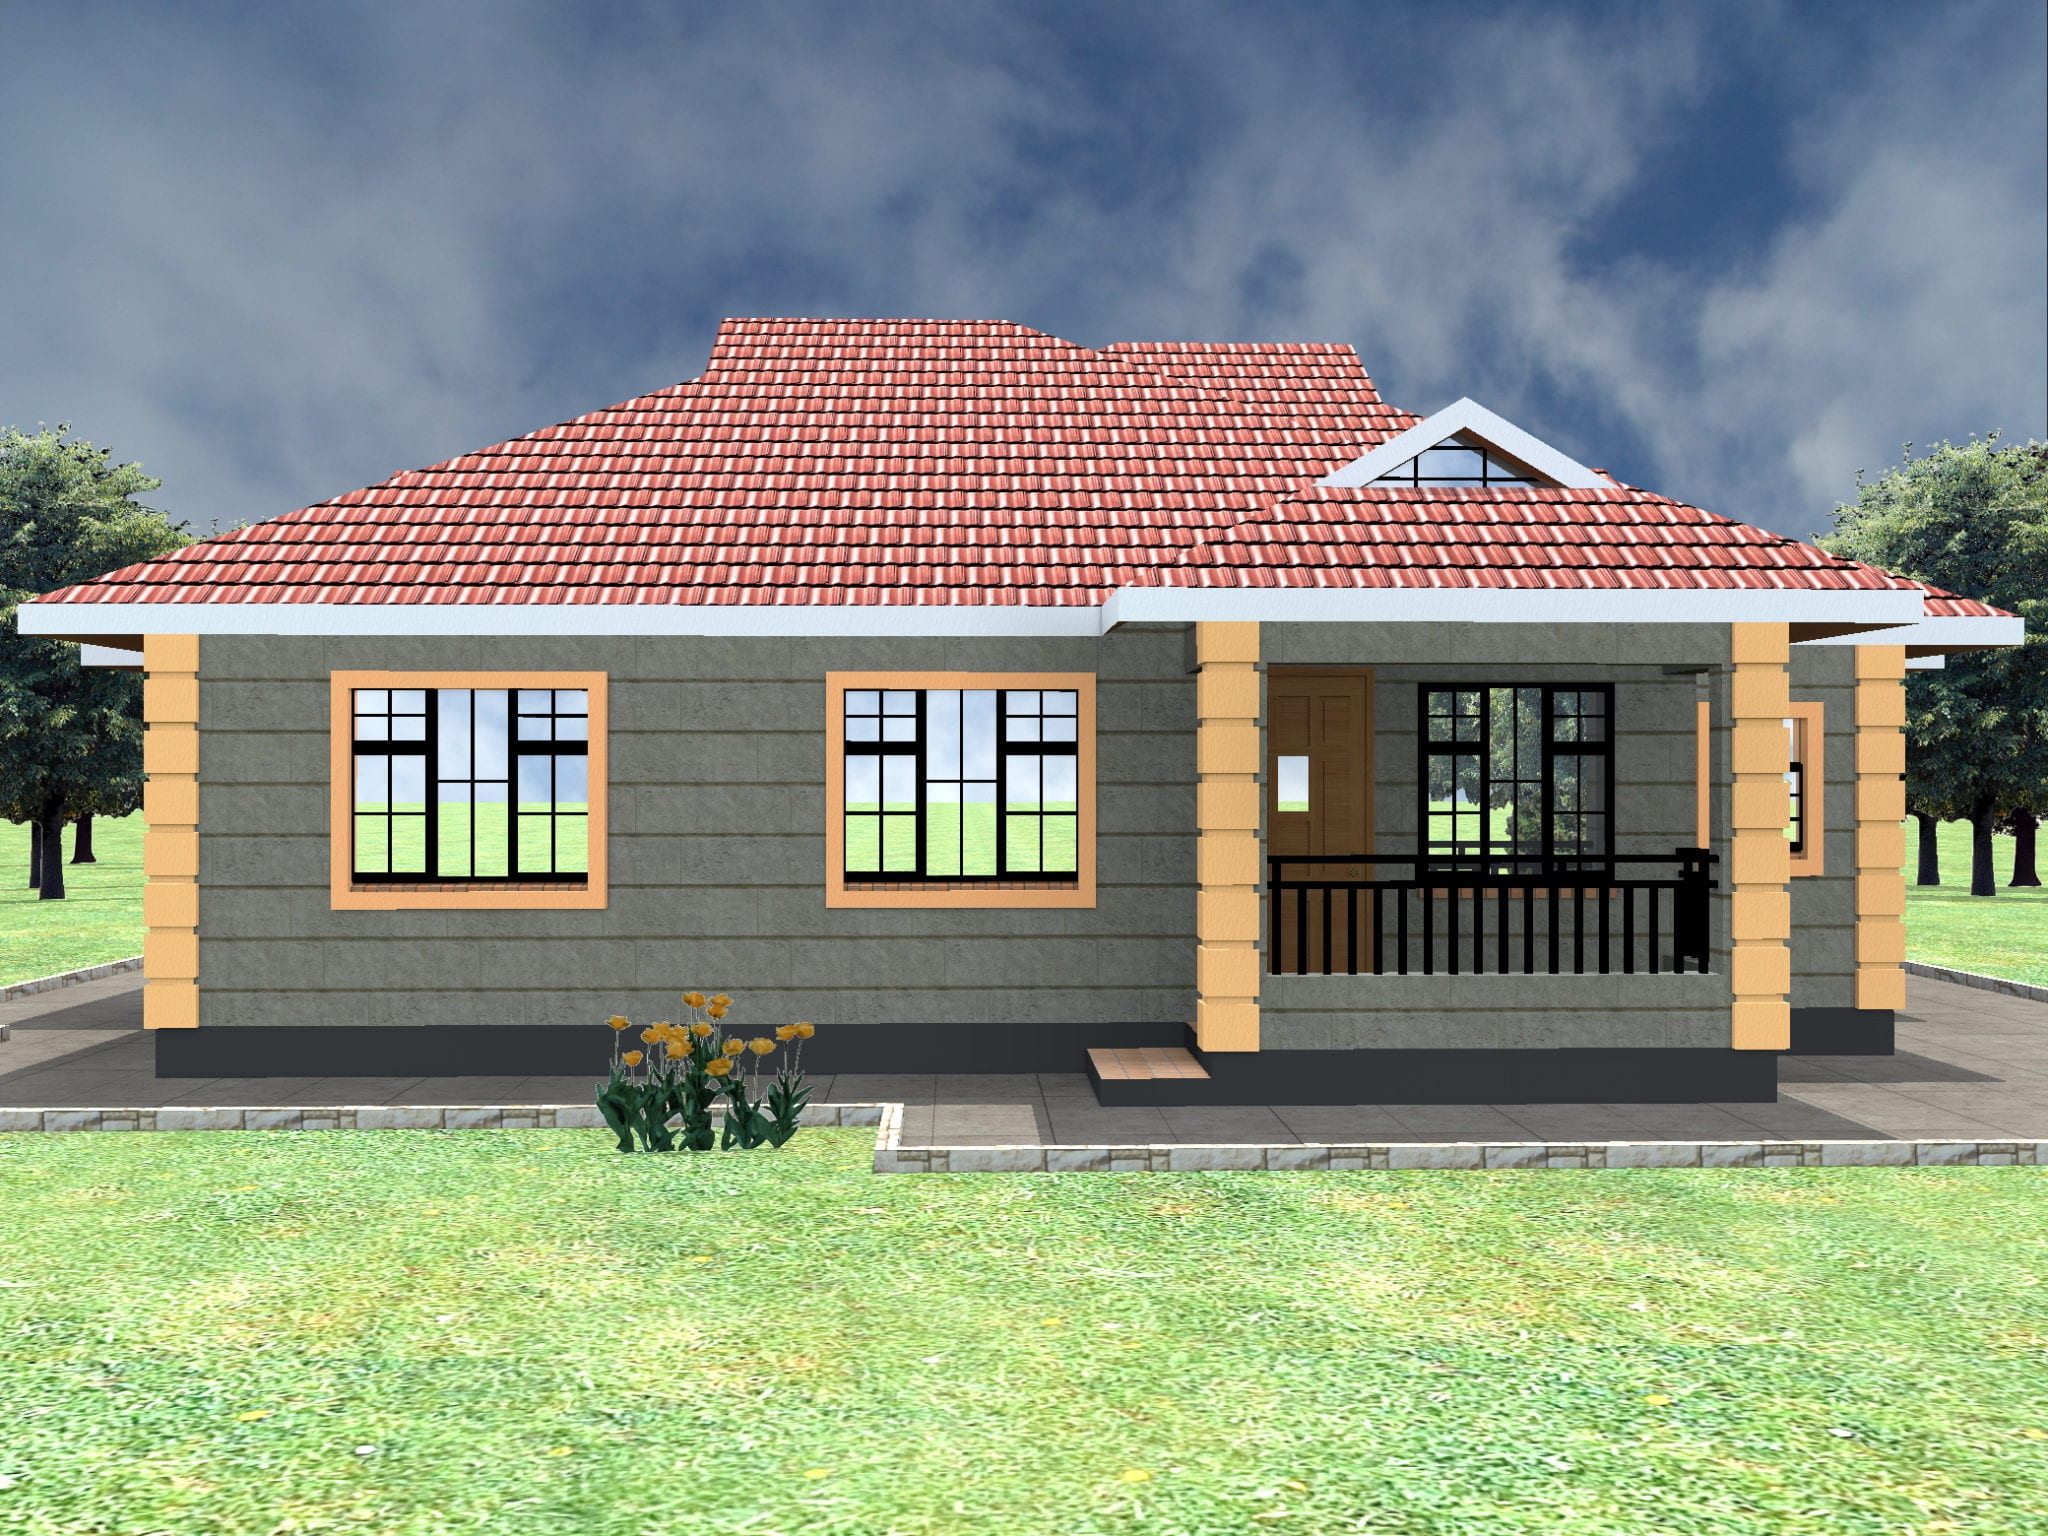 Simple 3 bedroom house plans without garage |HPD Consult